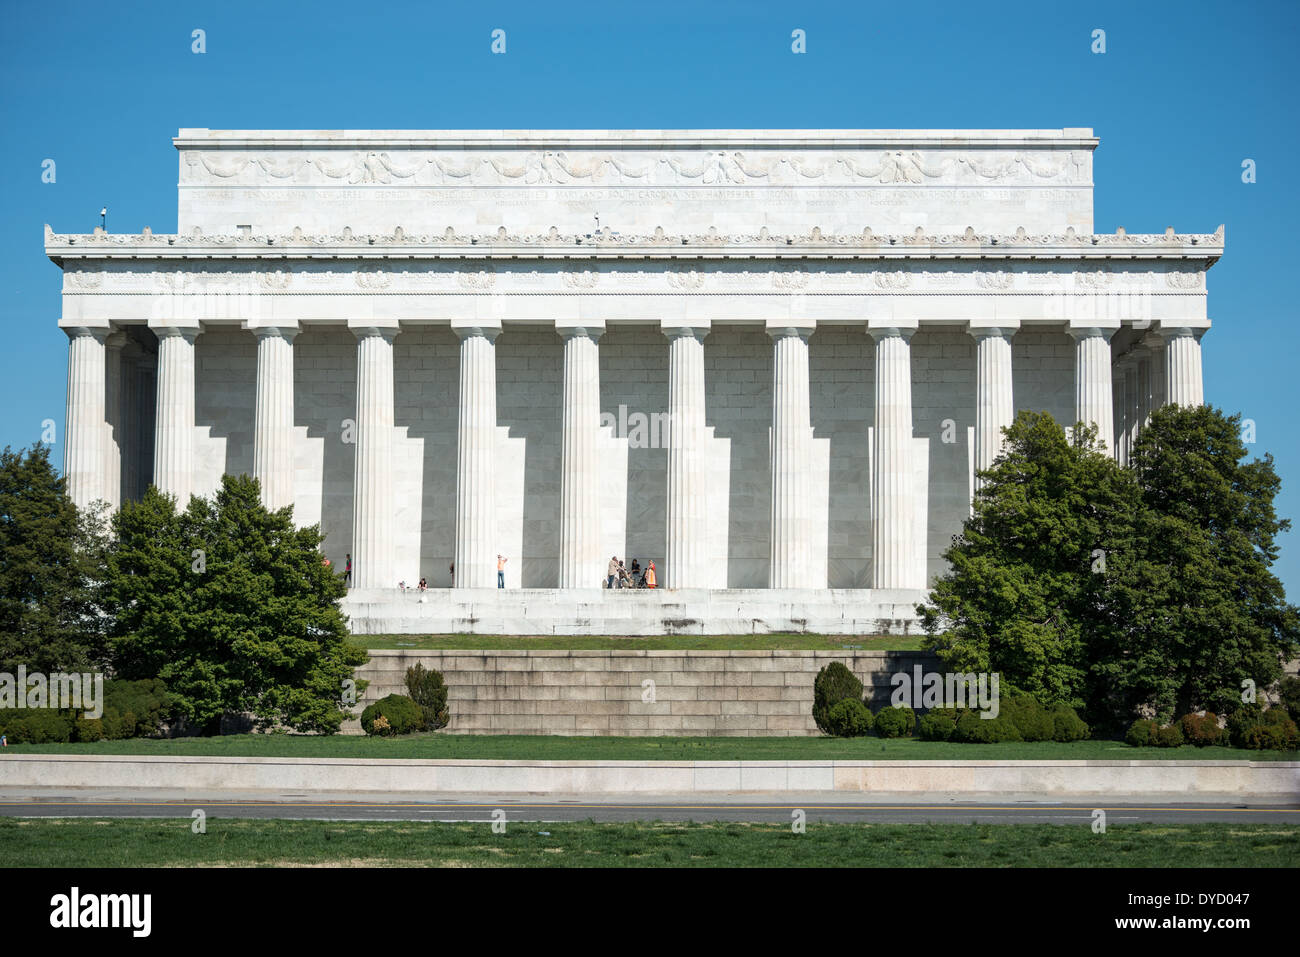 WASHINGTON DC, USA - The western face of the Lincoln Memorial on the National Mall in Washington DC. This side faces Arlington Memorial Bridge and Arlington National Cemetery. Stock Photo